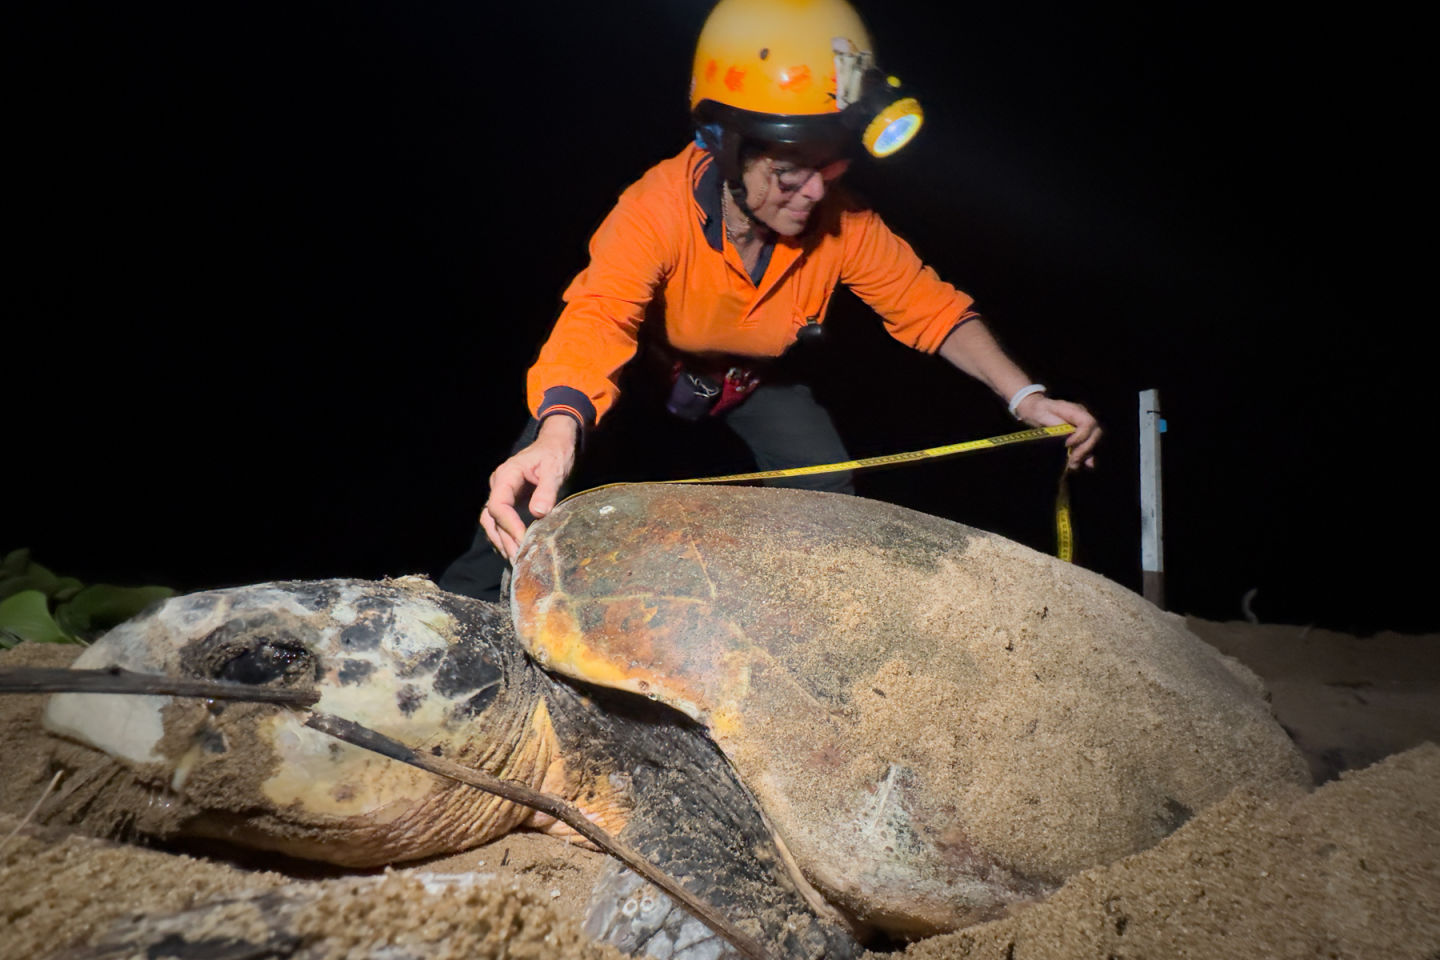 Bev measuring the carapace of a nesting loggerhead turtle. Credit: Ben and Di